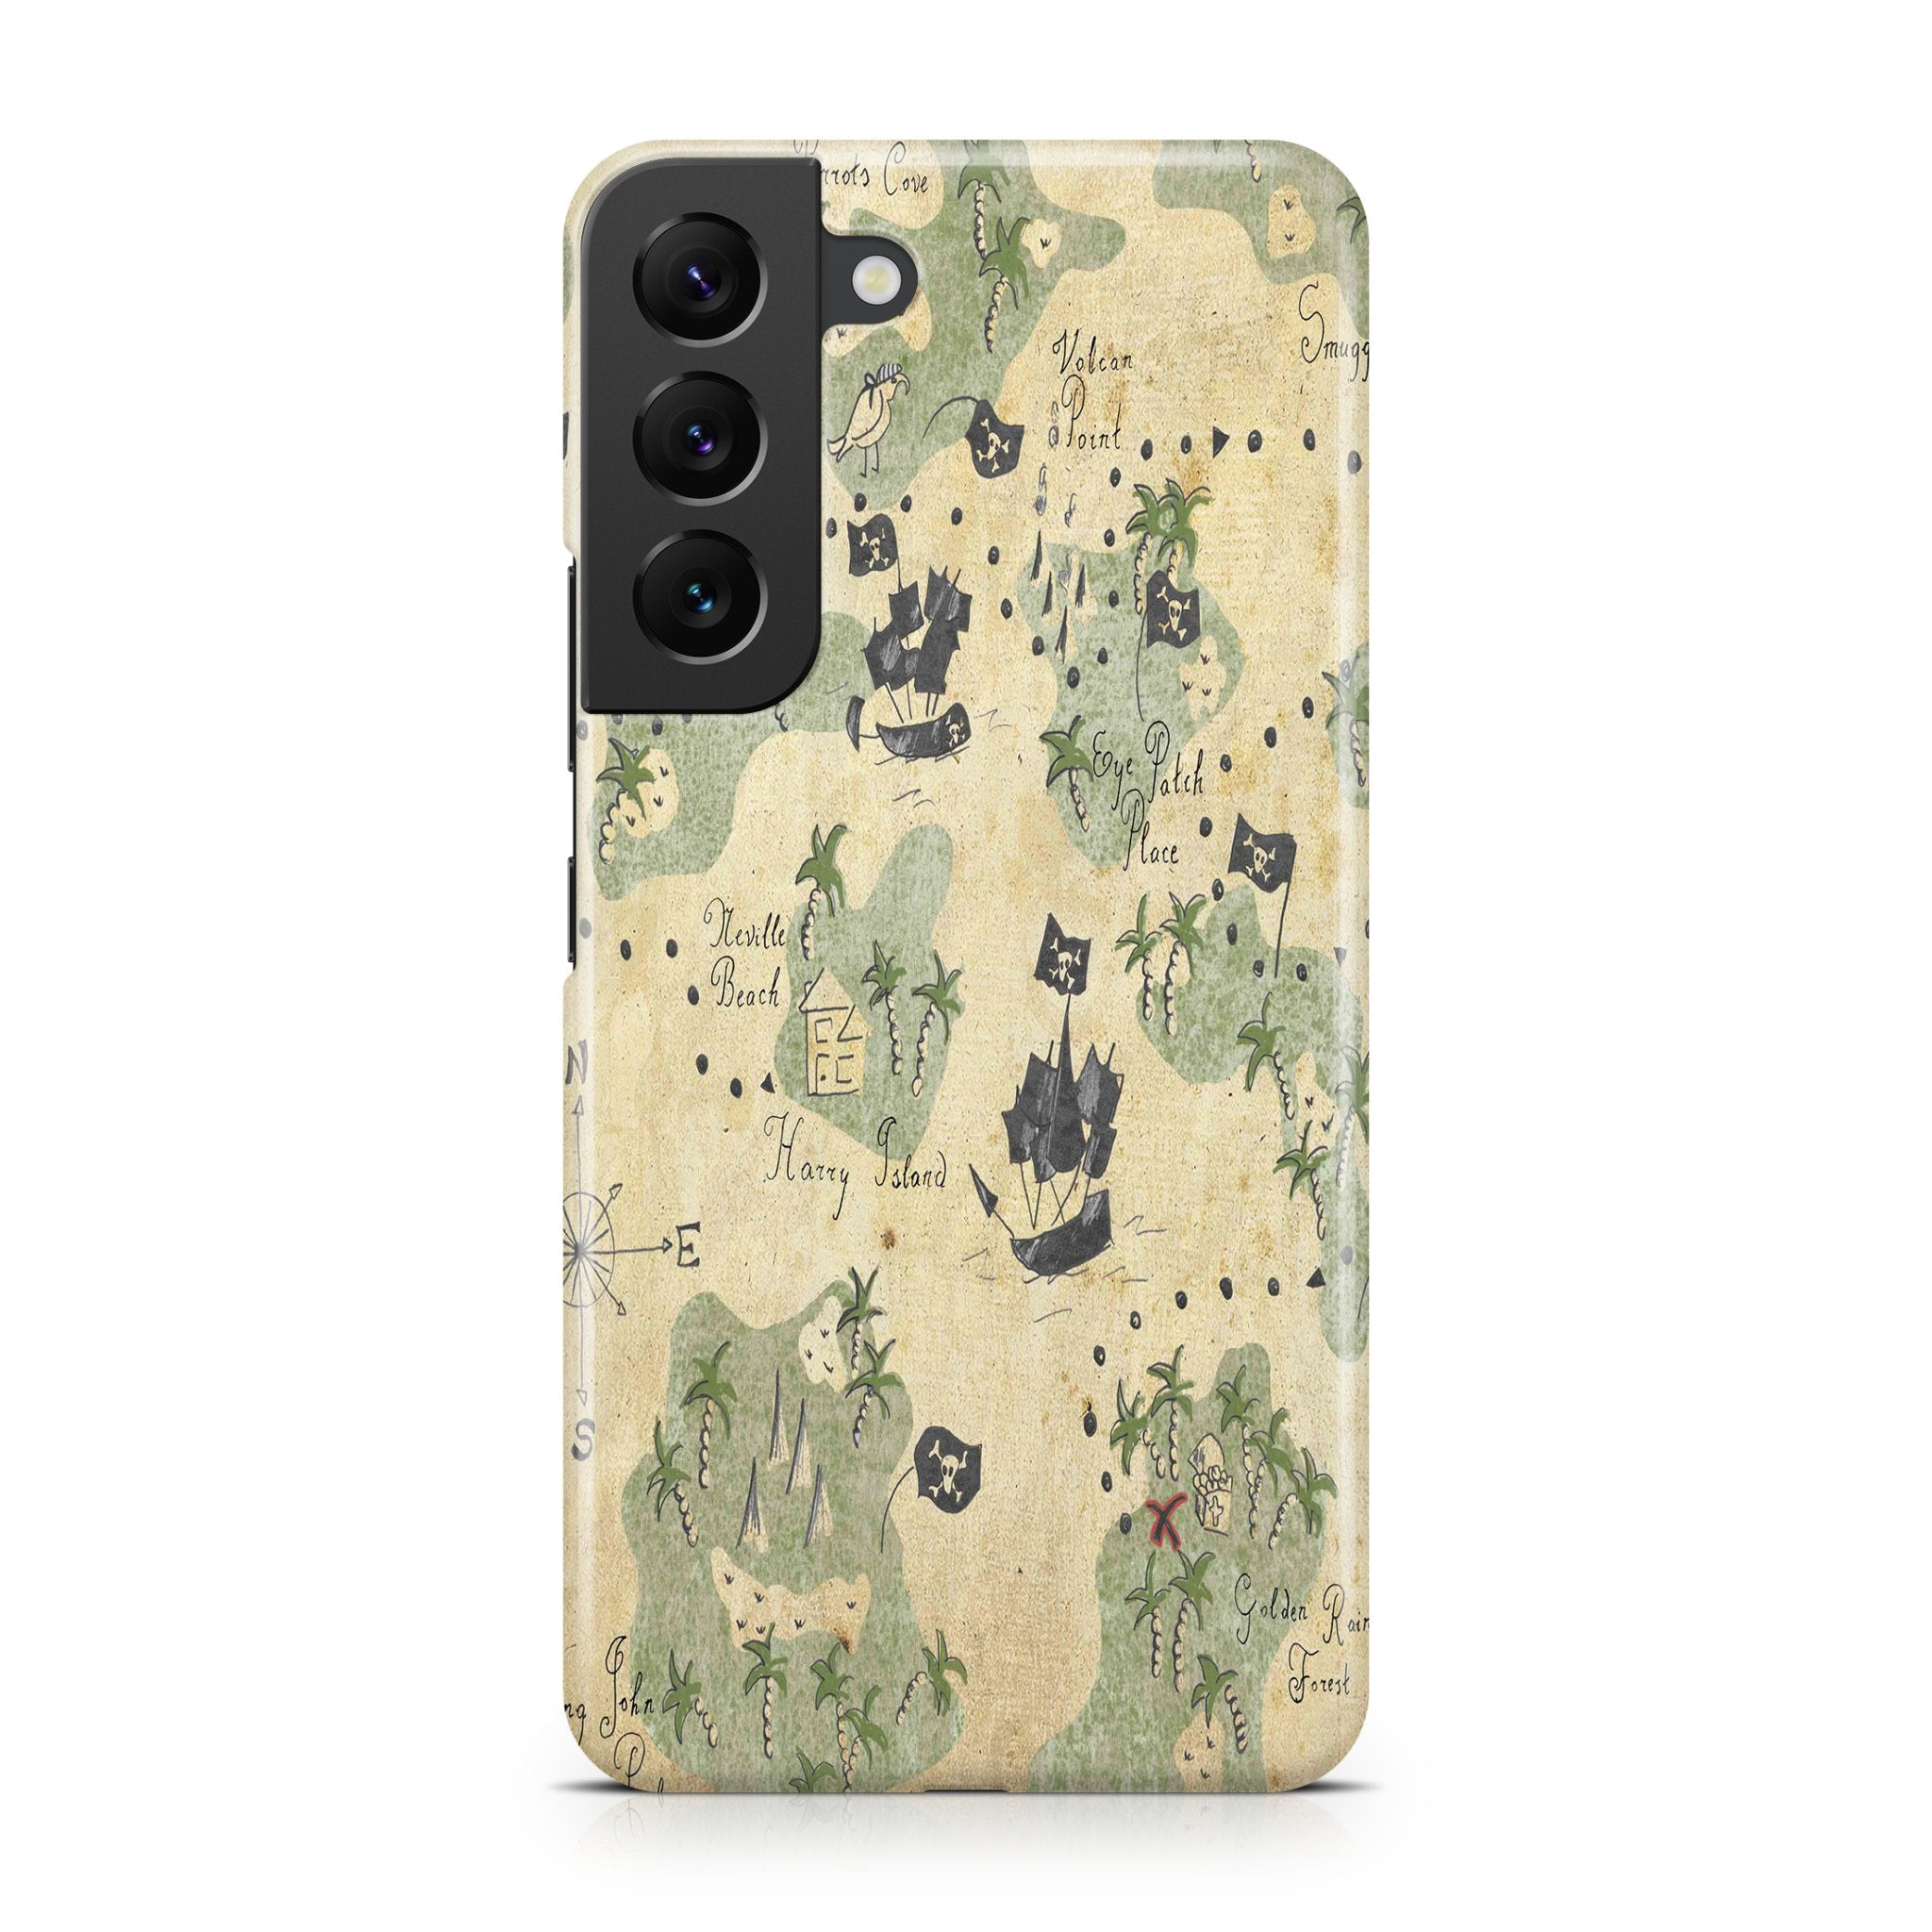 Pirate Map - Samsung phone case designs by CaseSwagger